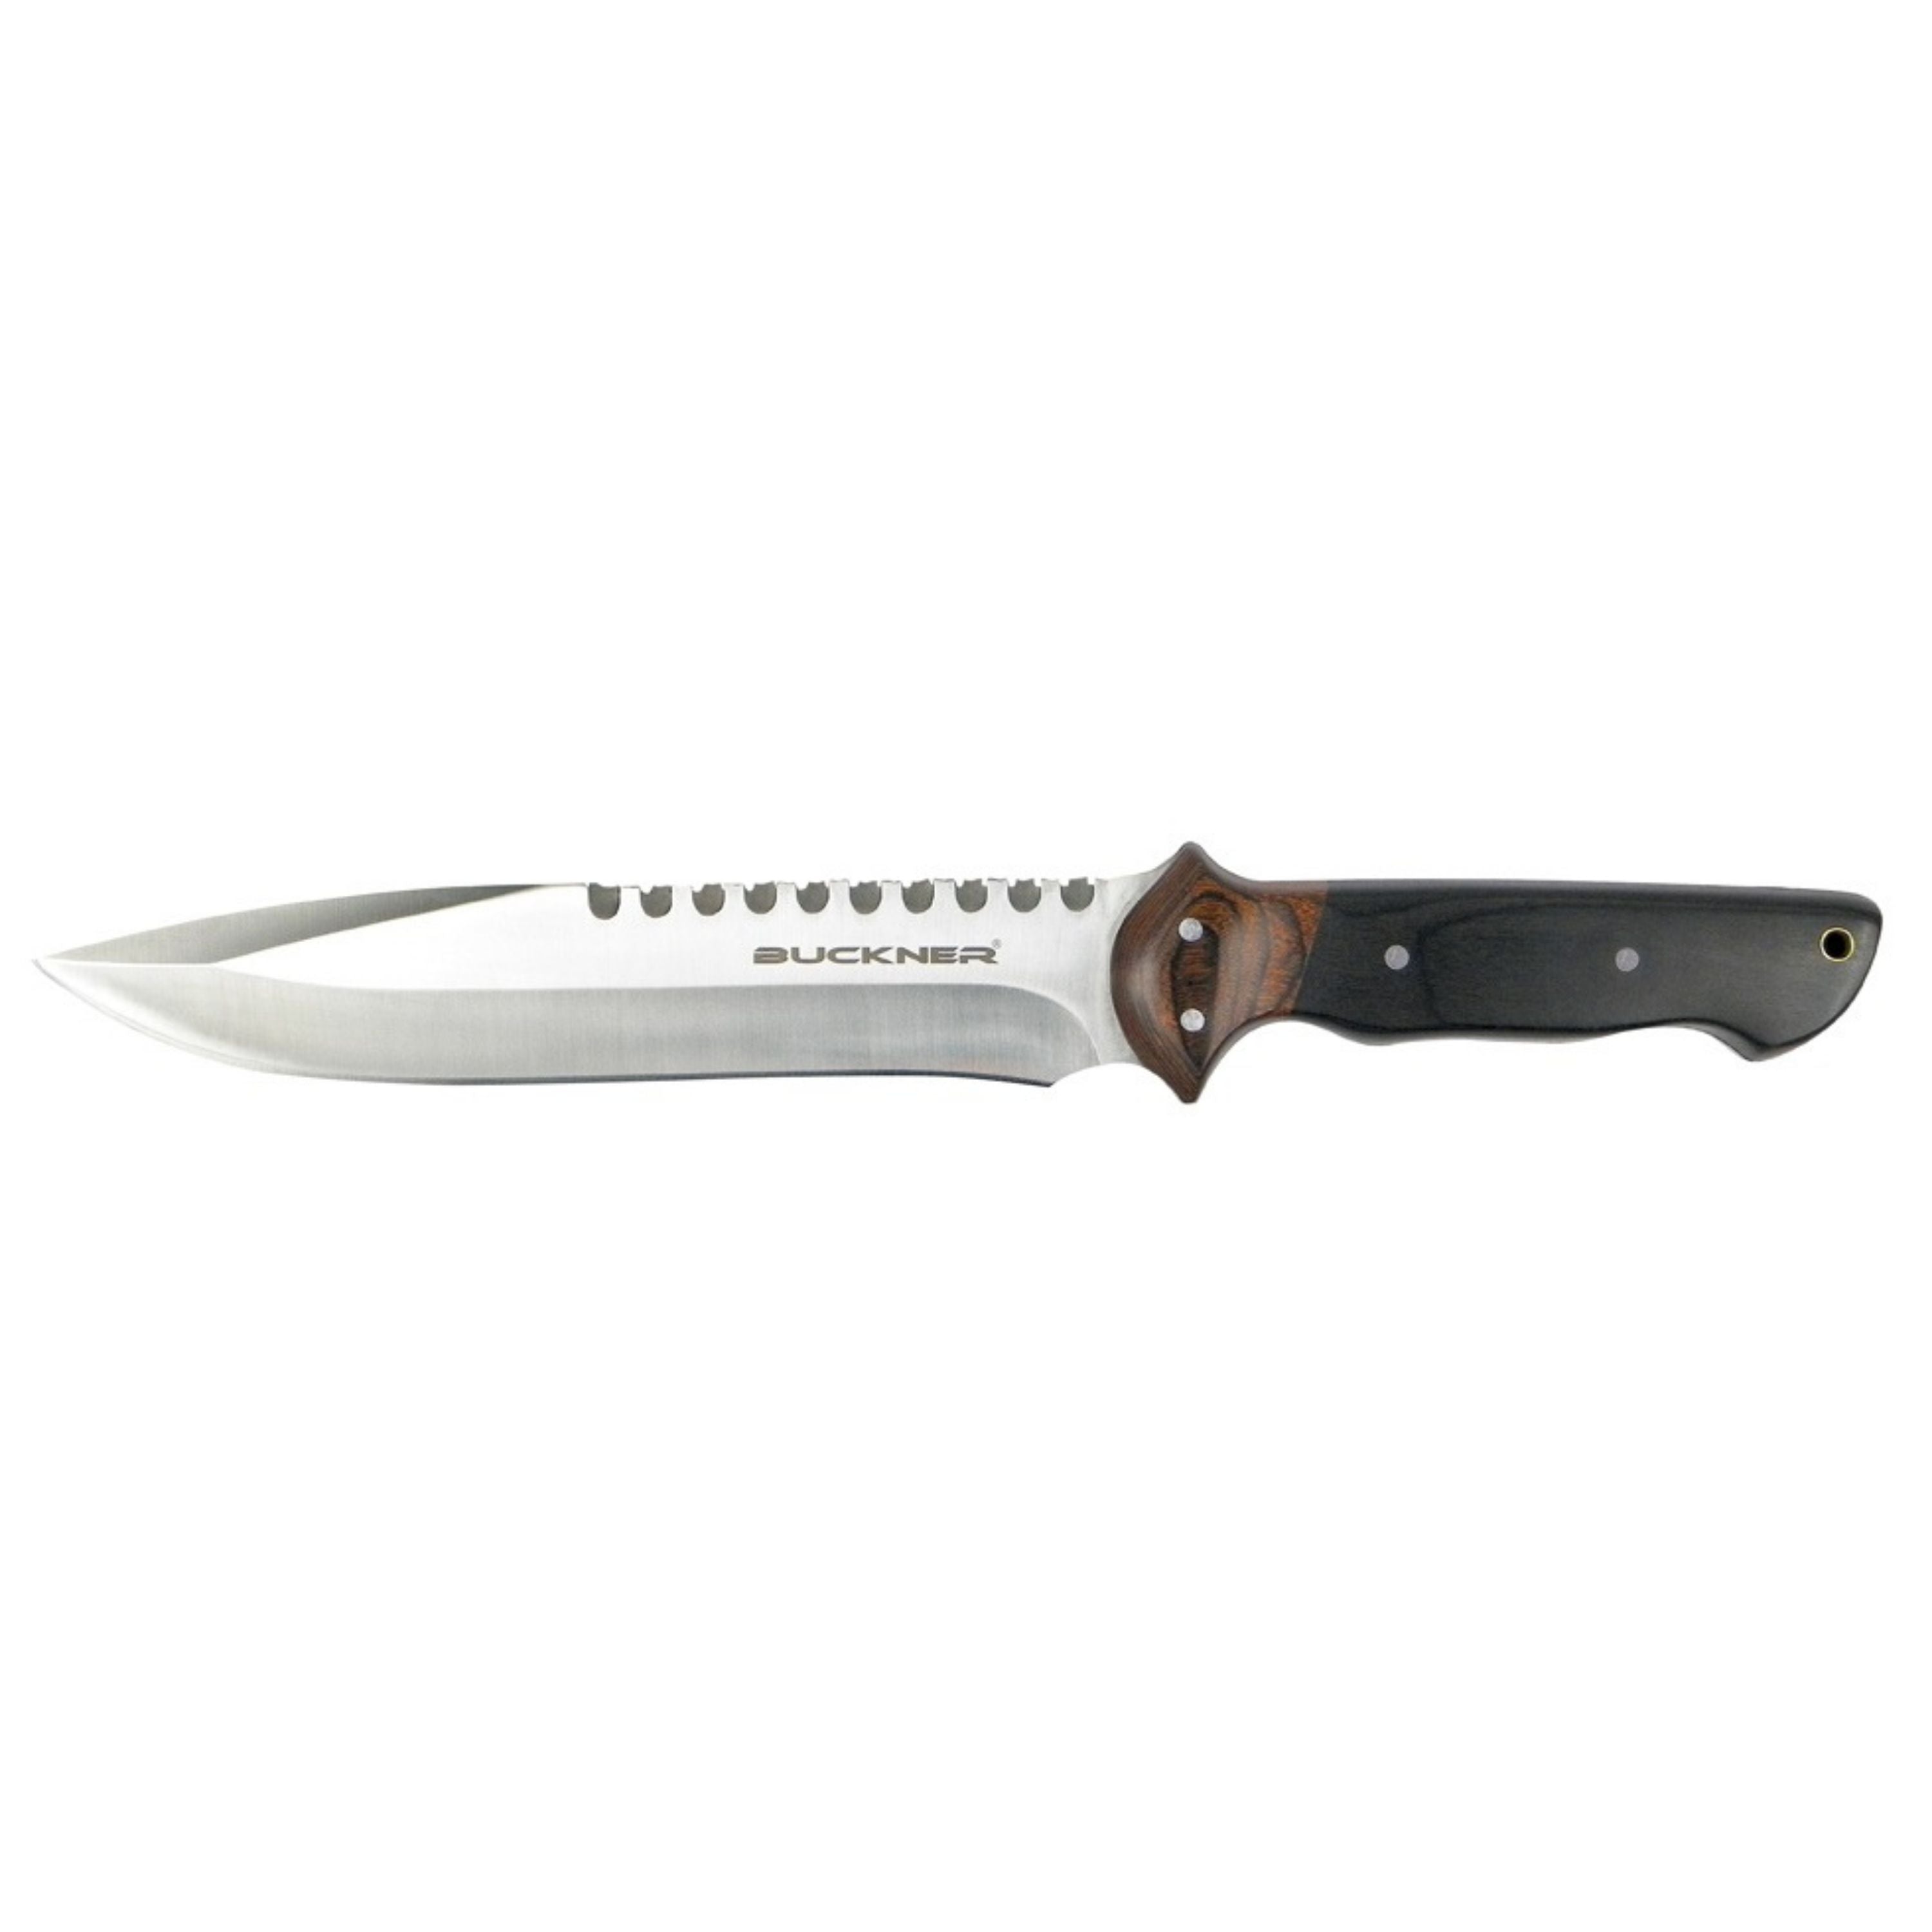 14-inch "Bowie" knife